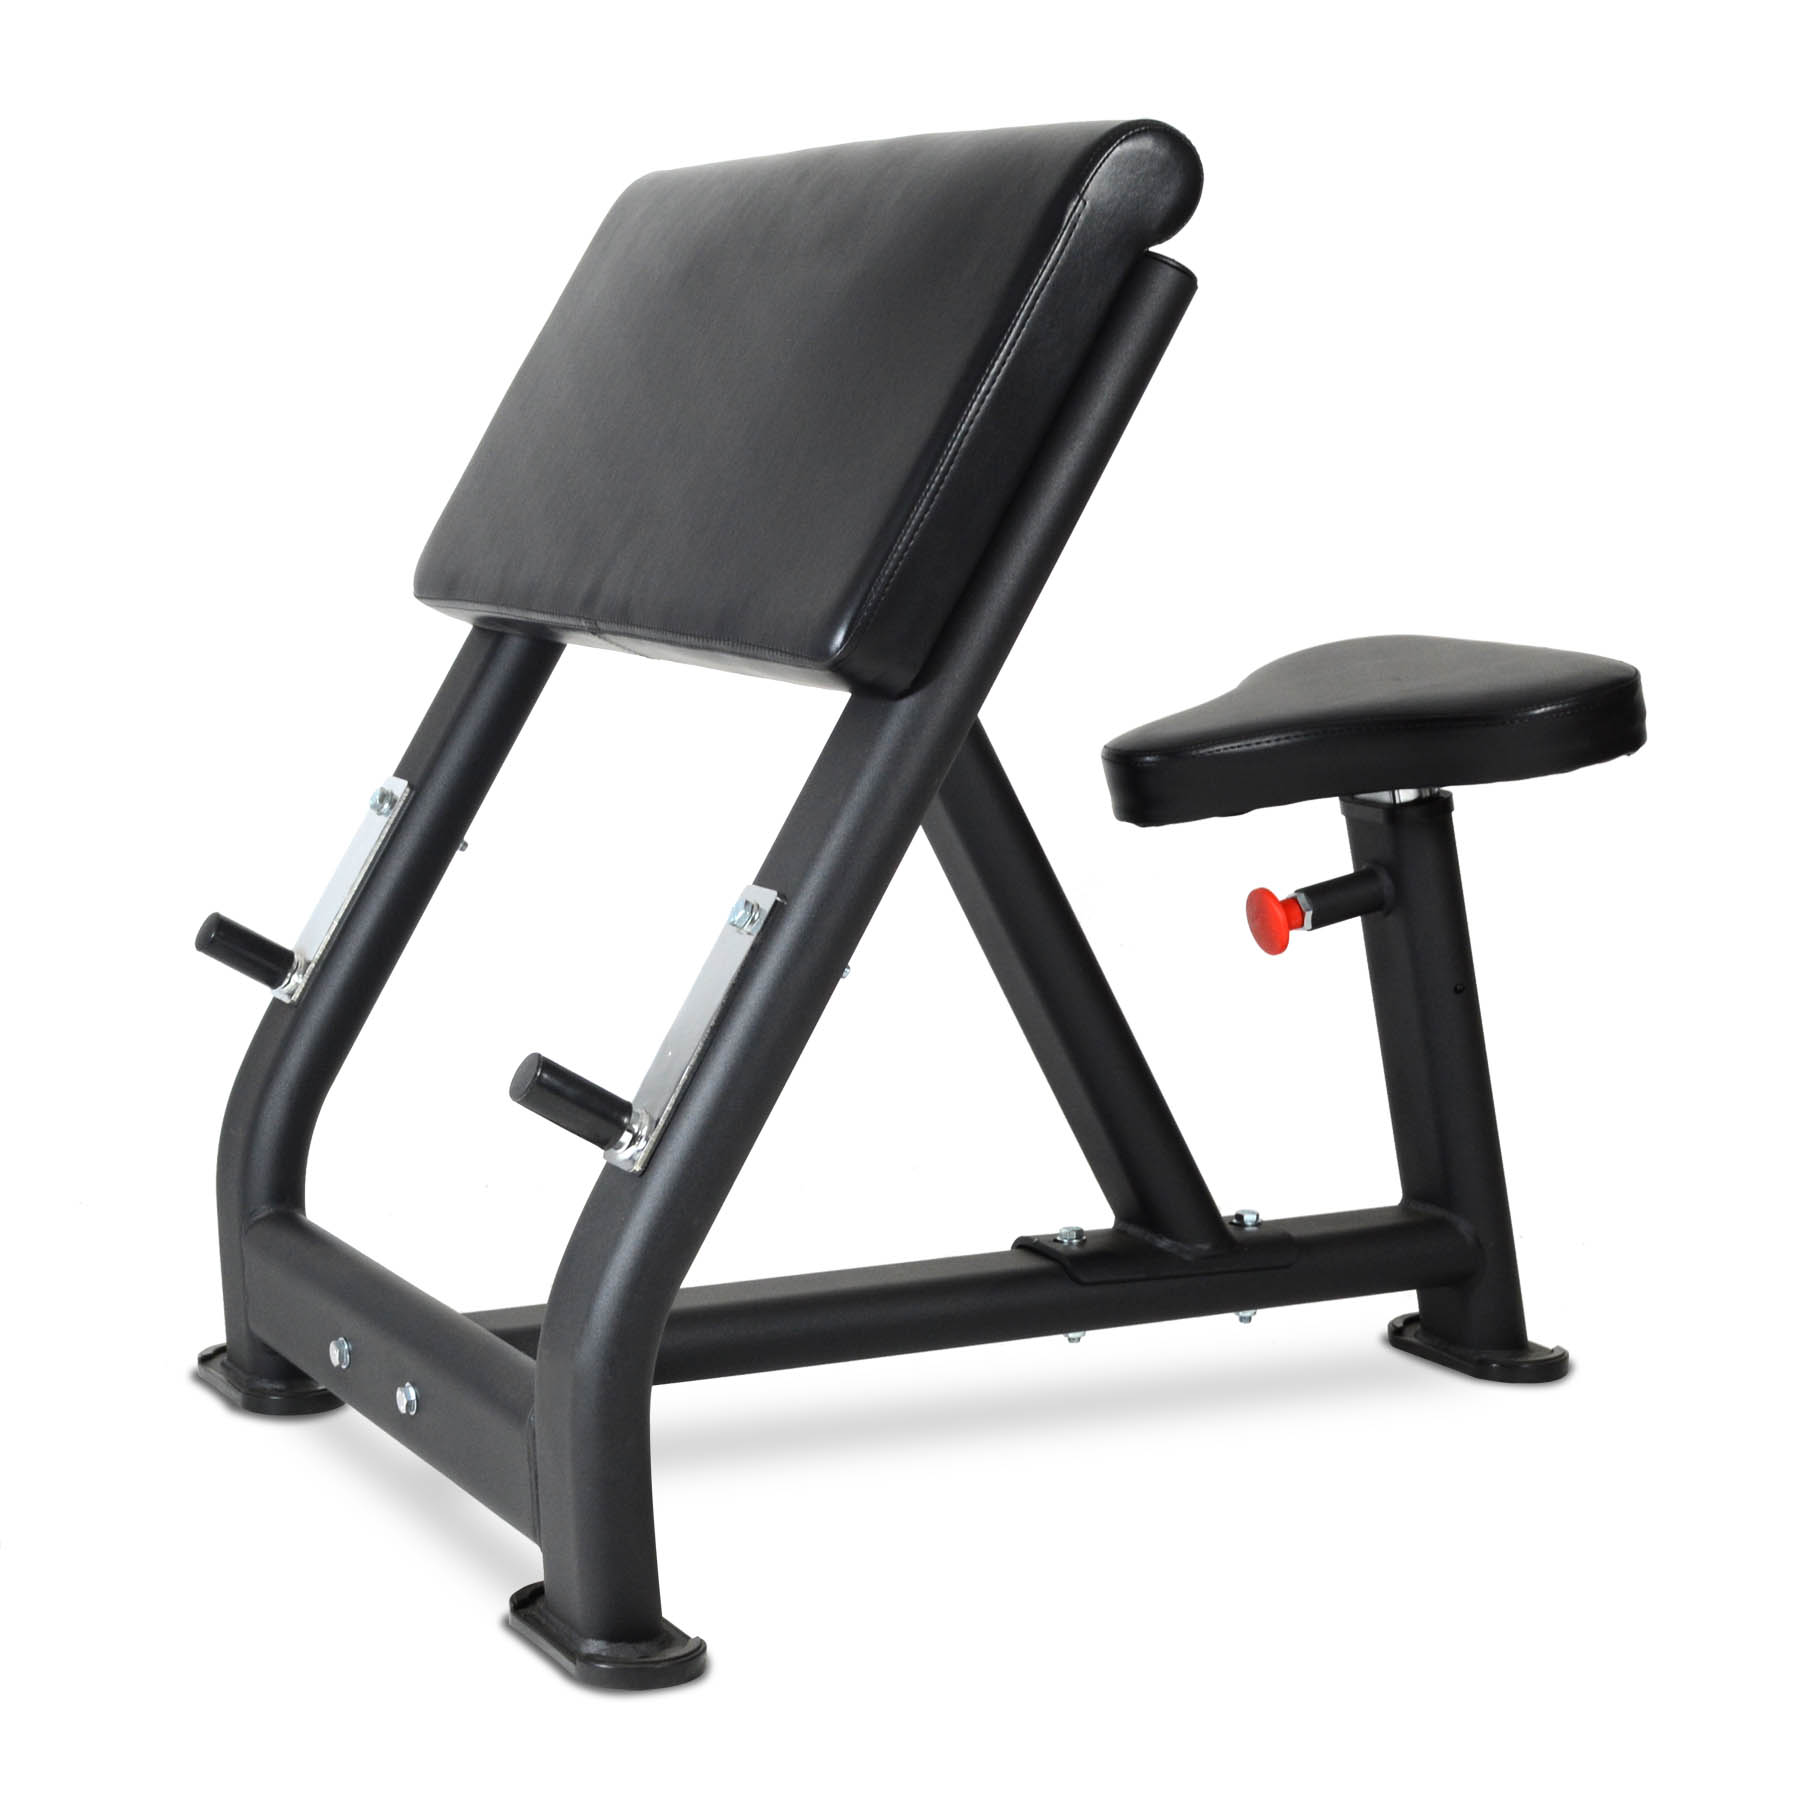 Bodymax BE265 Black Commercial Preacher Curl Bench • West Coast Fitness